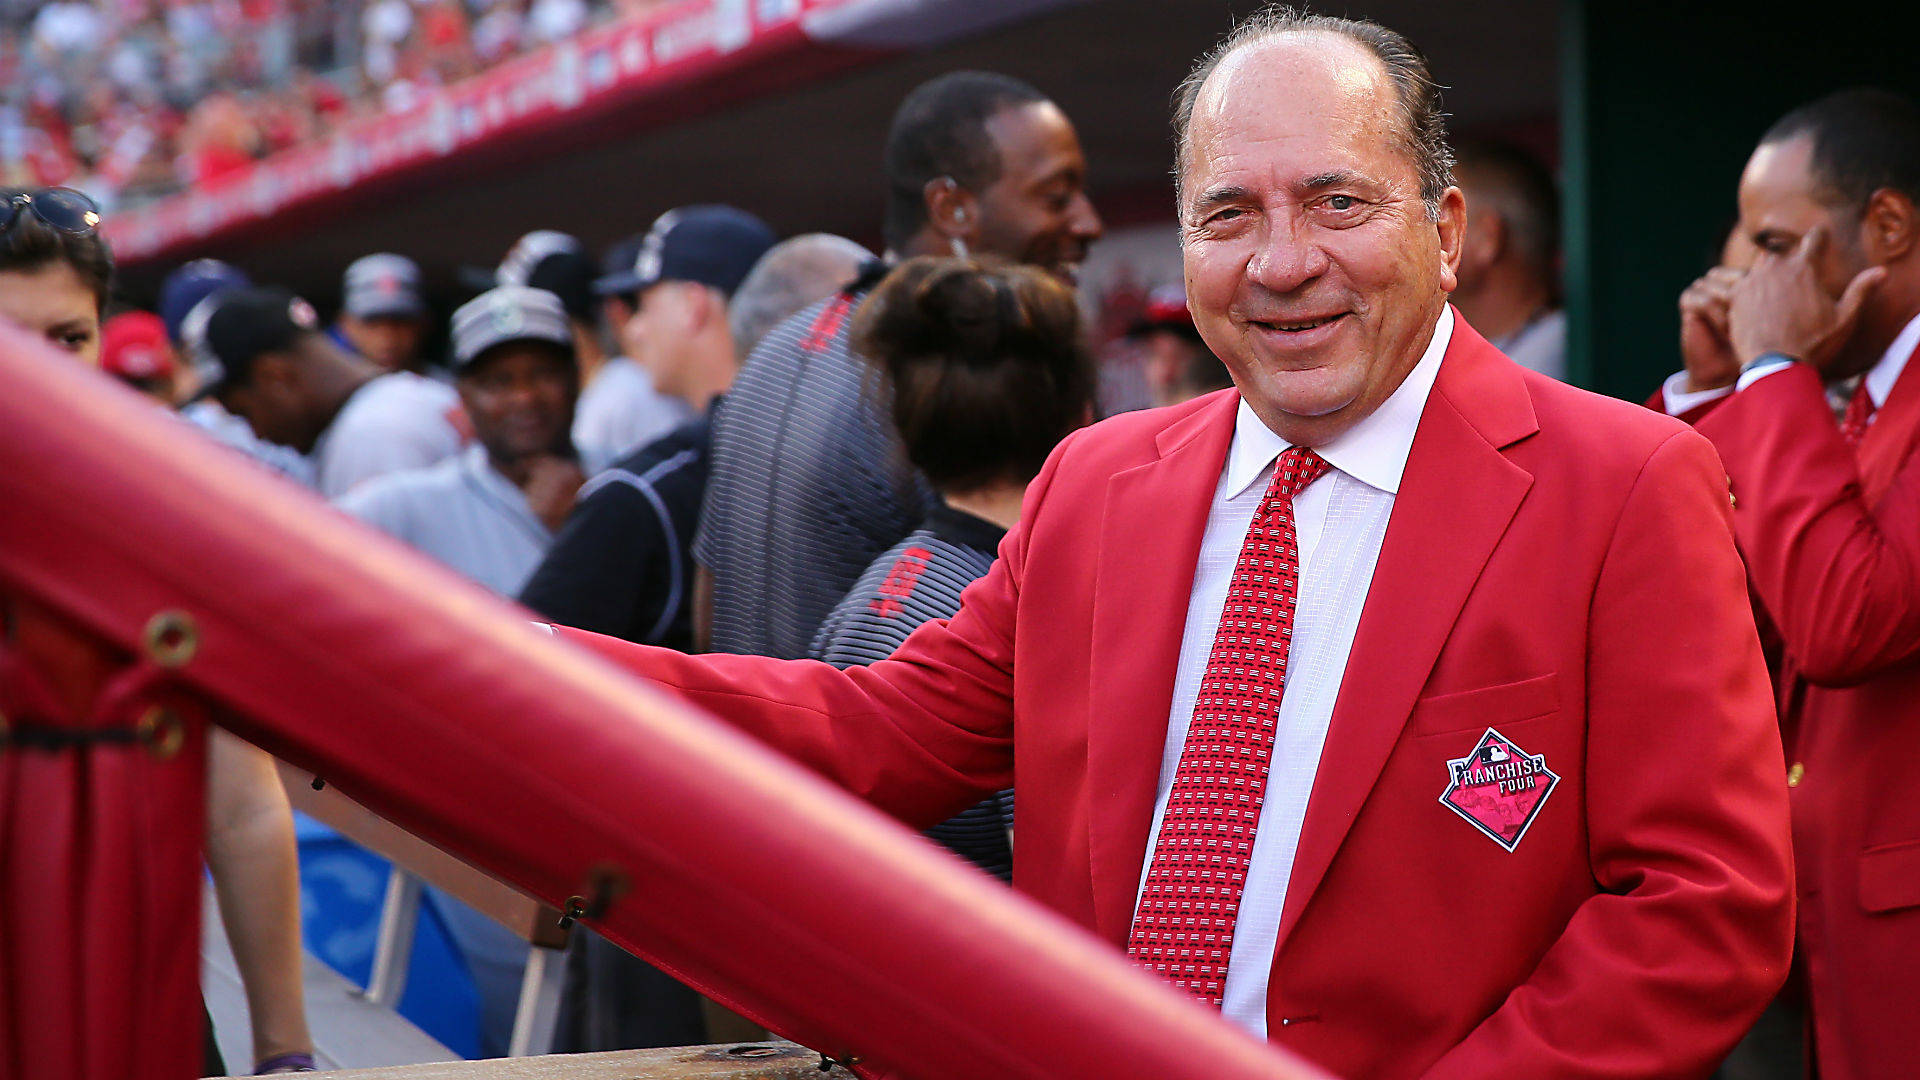 Johnny Bench In Red Suit Background